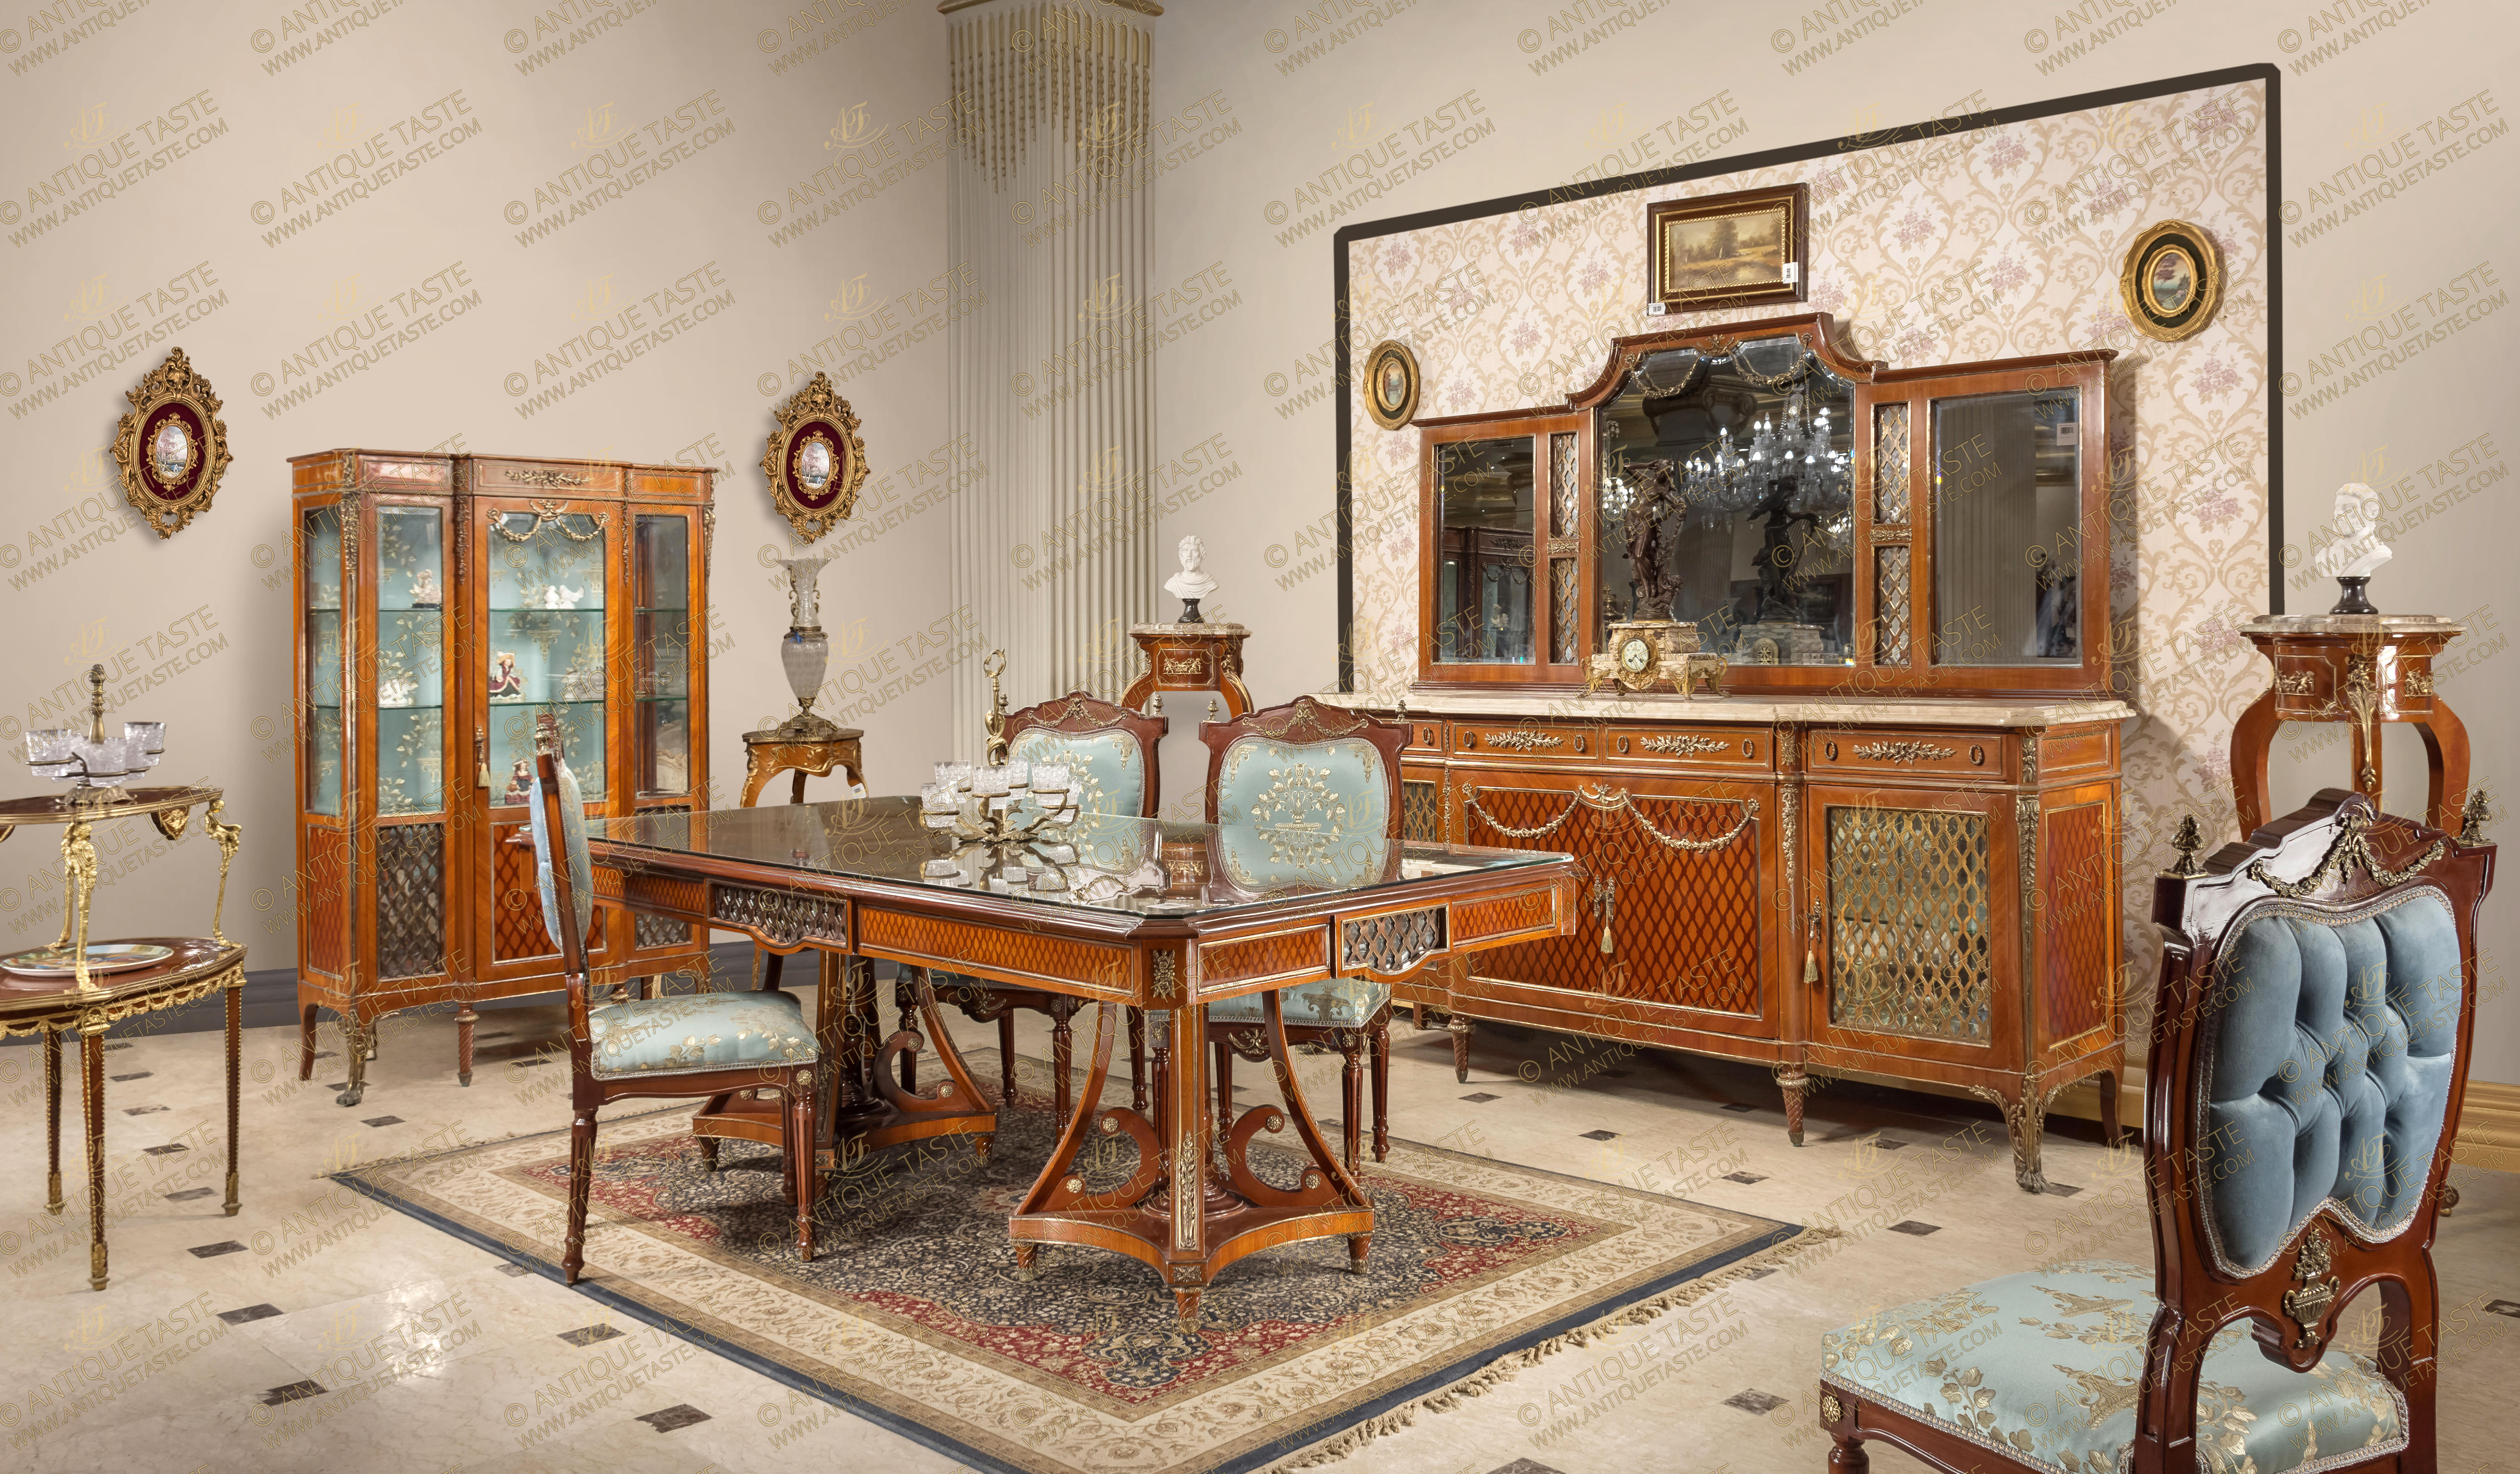 Louis XVI Furniture, French Neo Classical Style